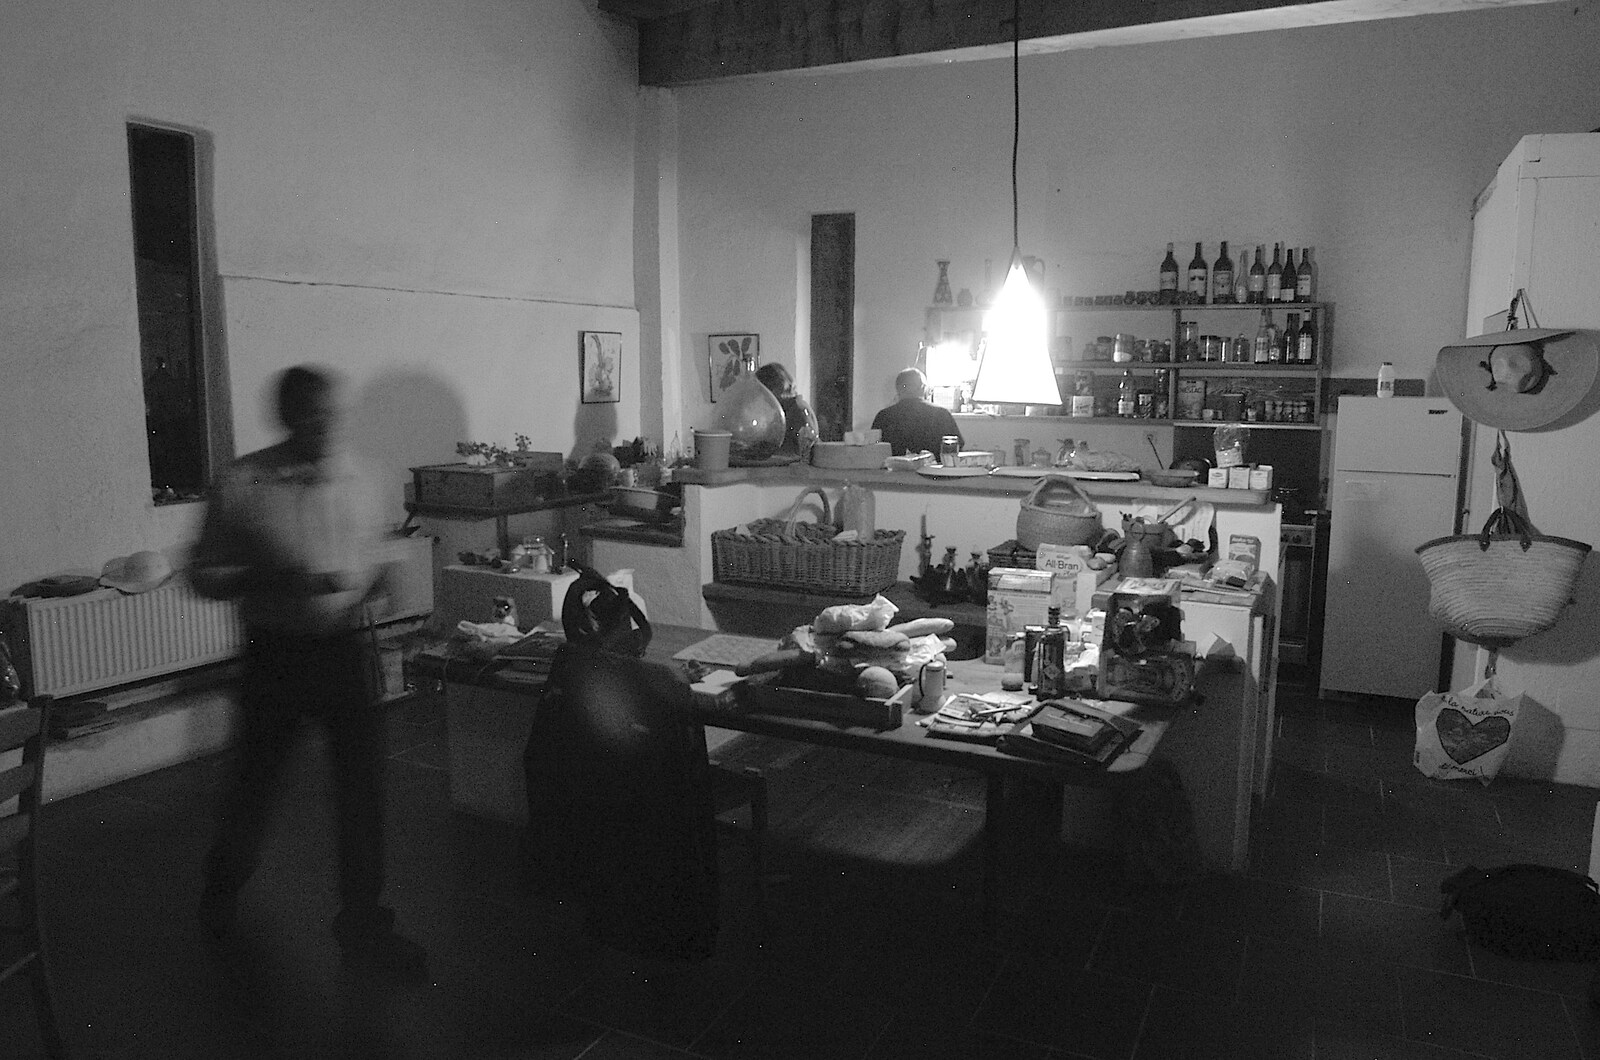 In the kitchen at night from A Roussillon Farmhouse, Fourques, Perpignan, France - 17th September 2006